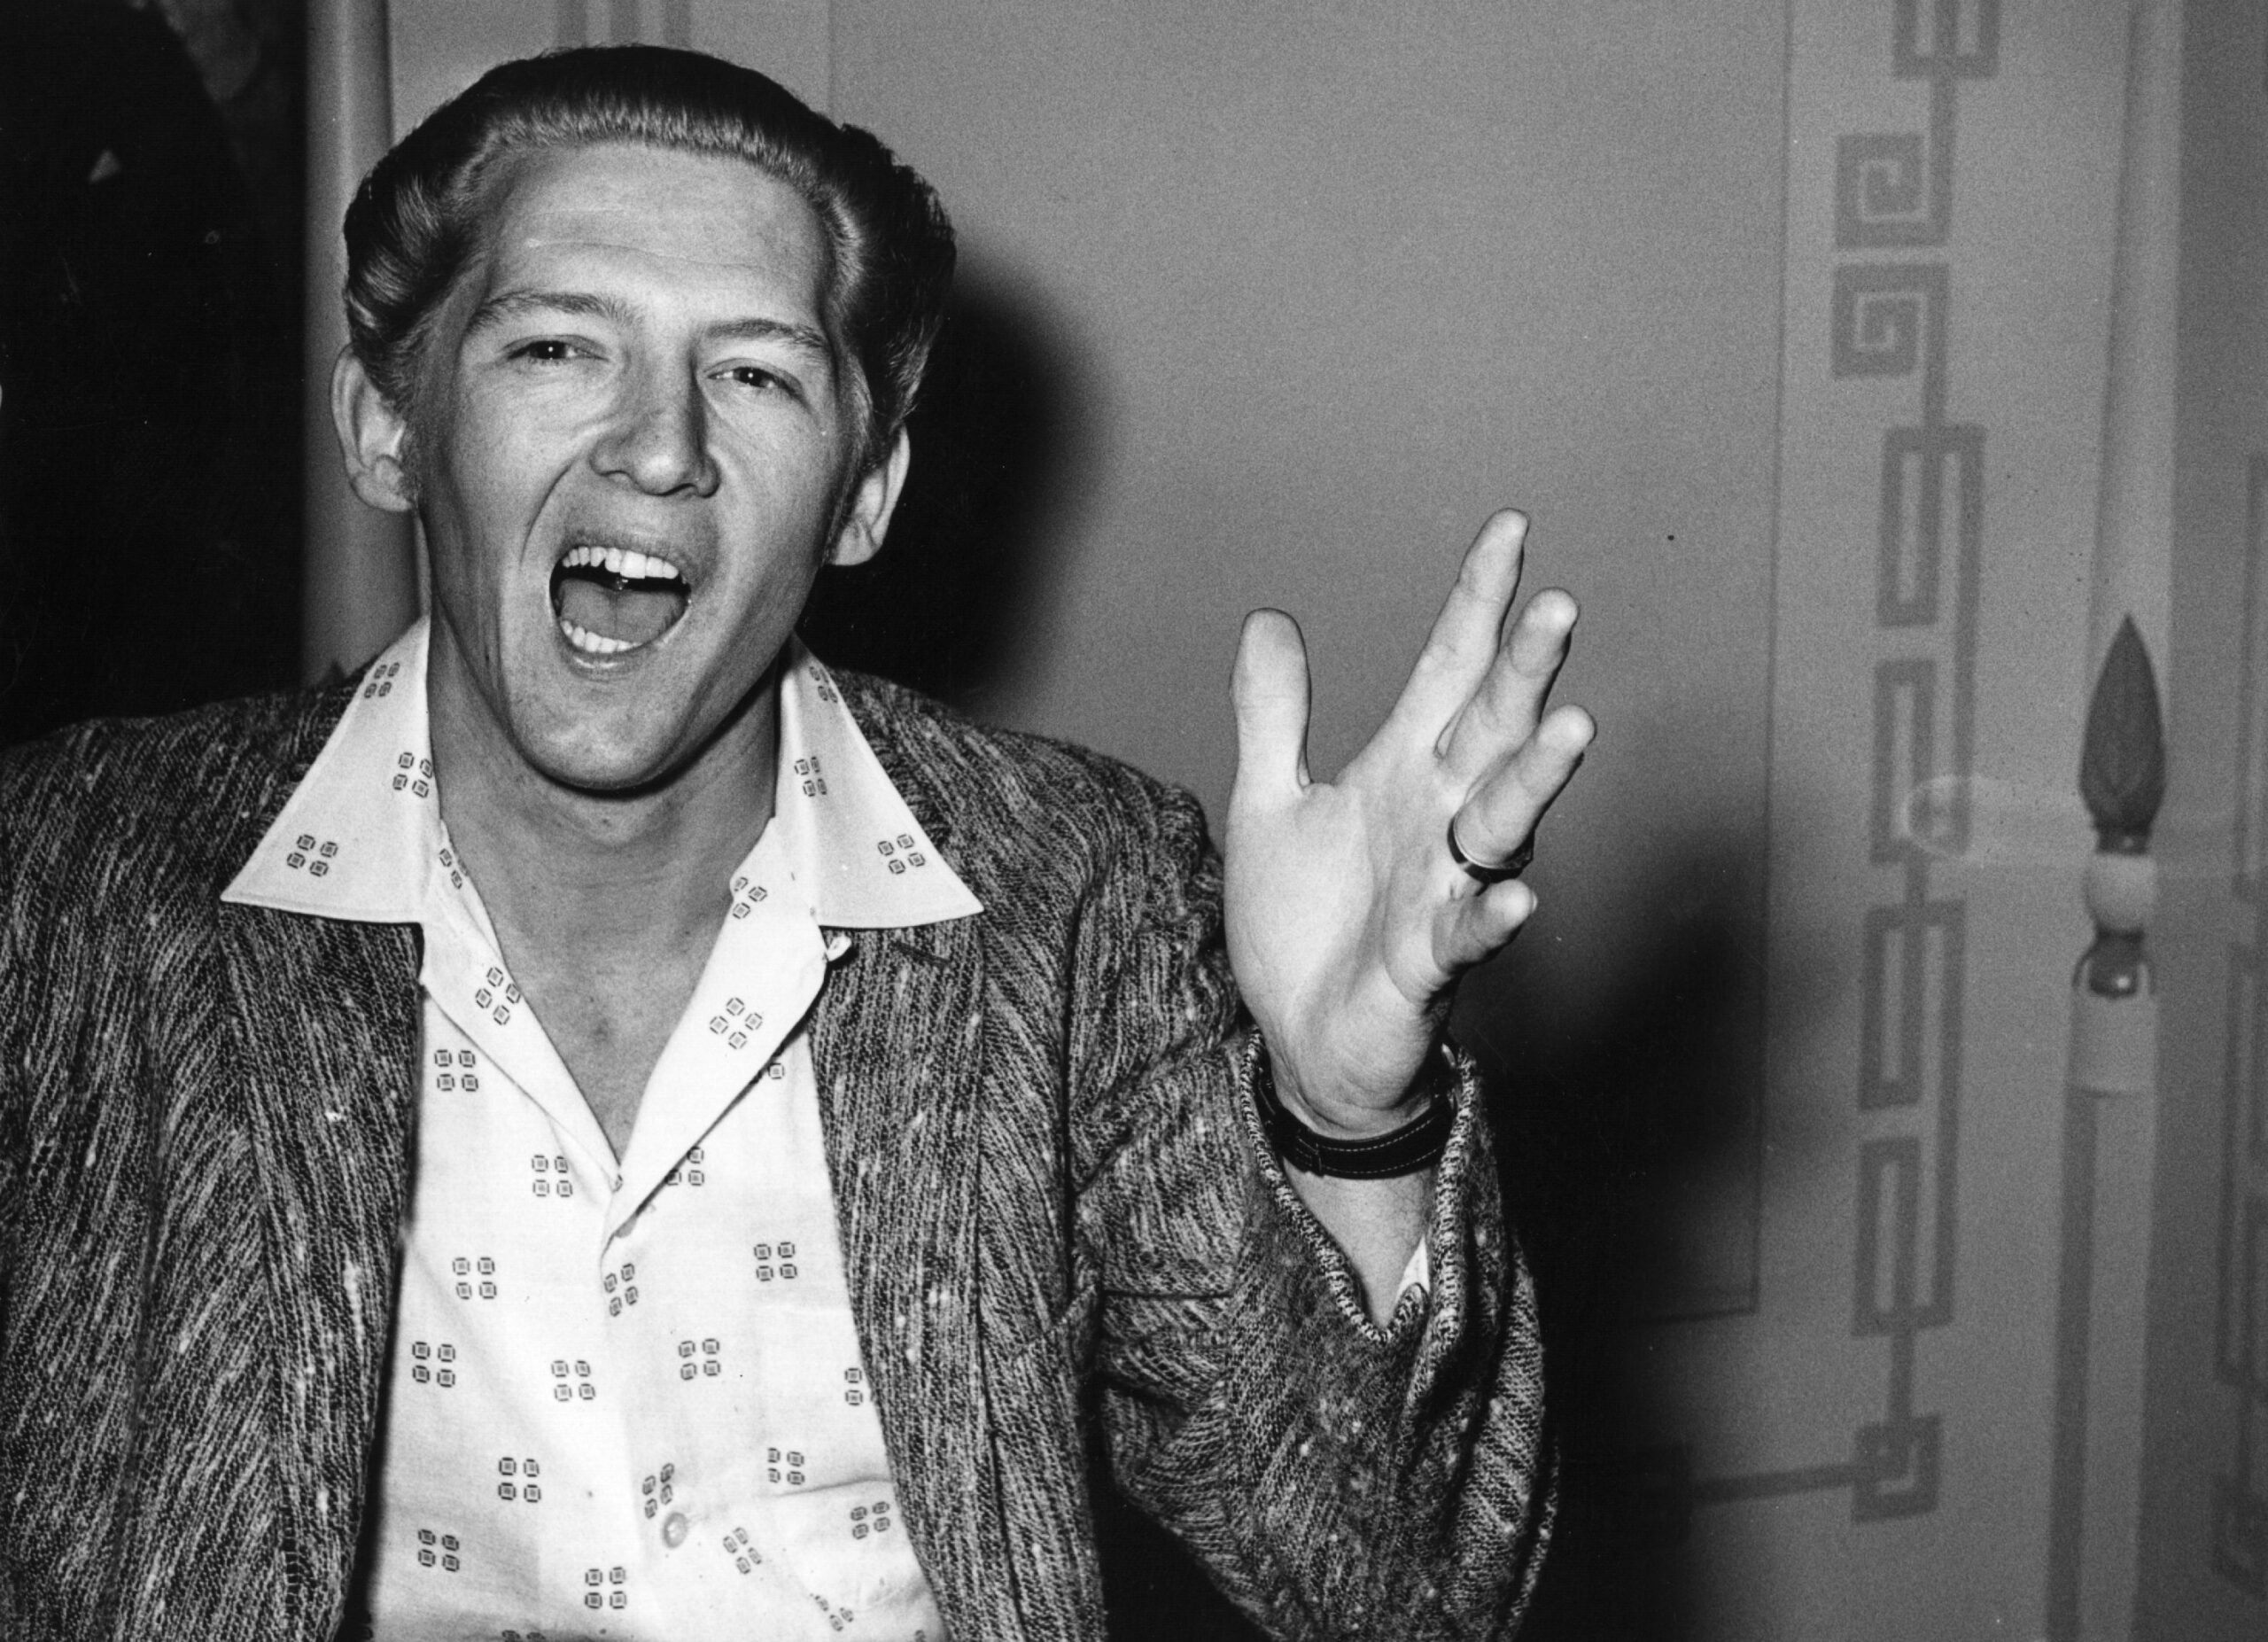 Jerry Lee Lewis, Rock and Roll Forefather and 'Great Balls of Fire' Singer, Dies at 87